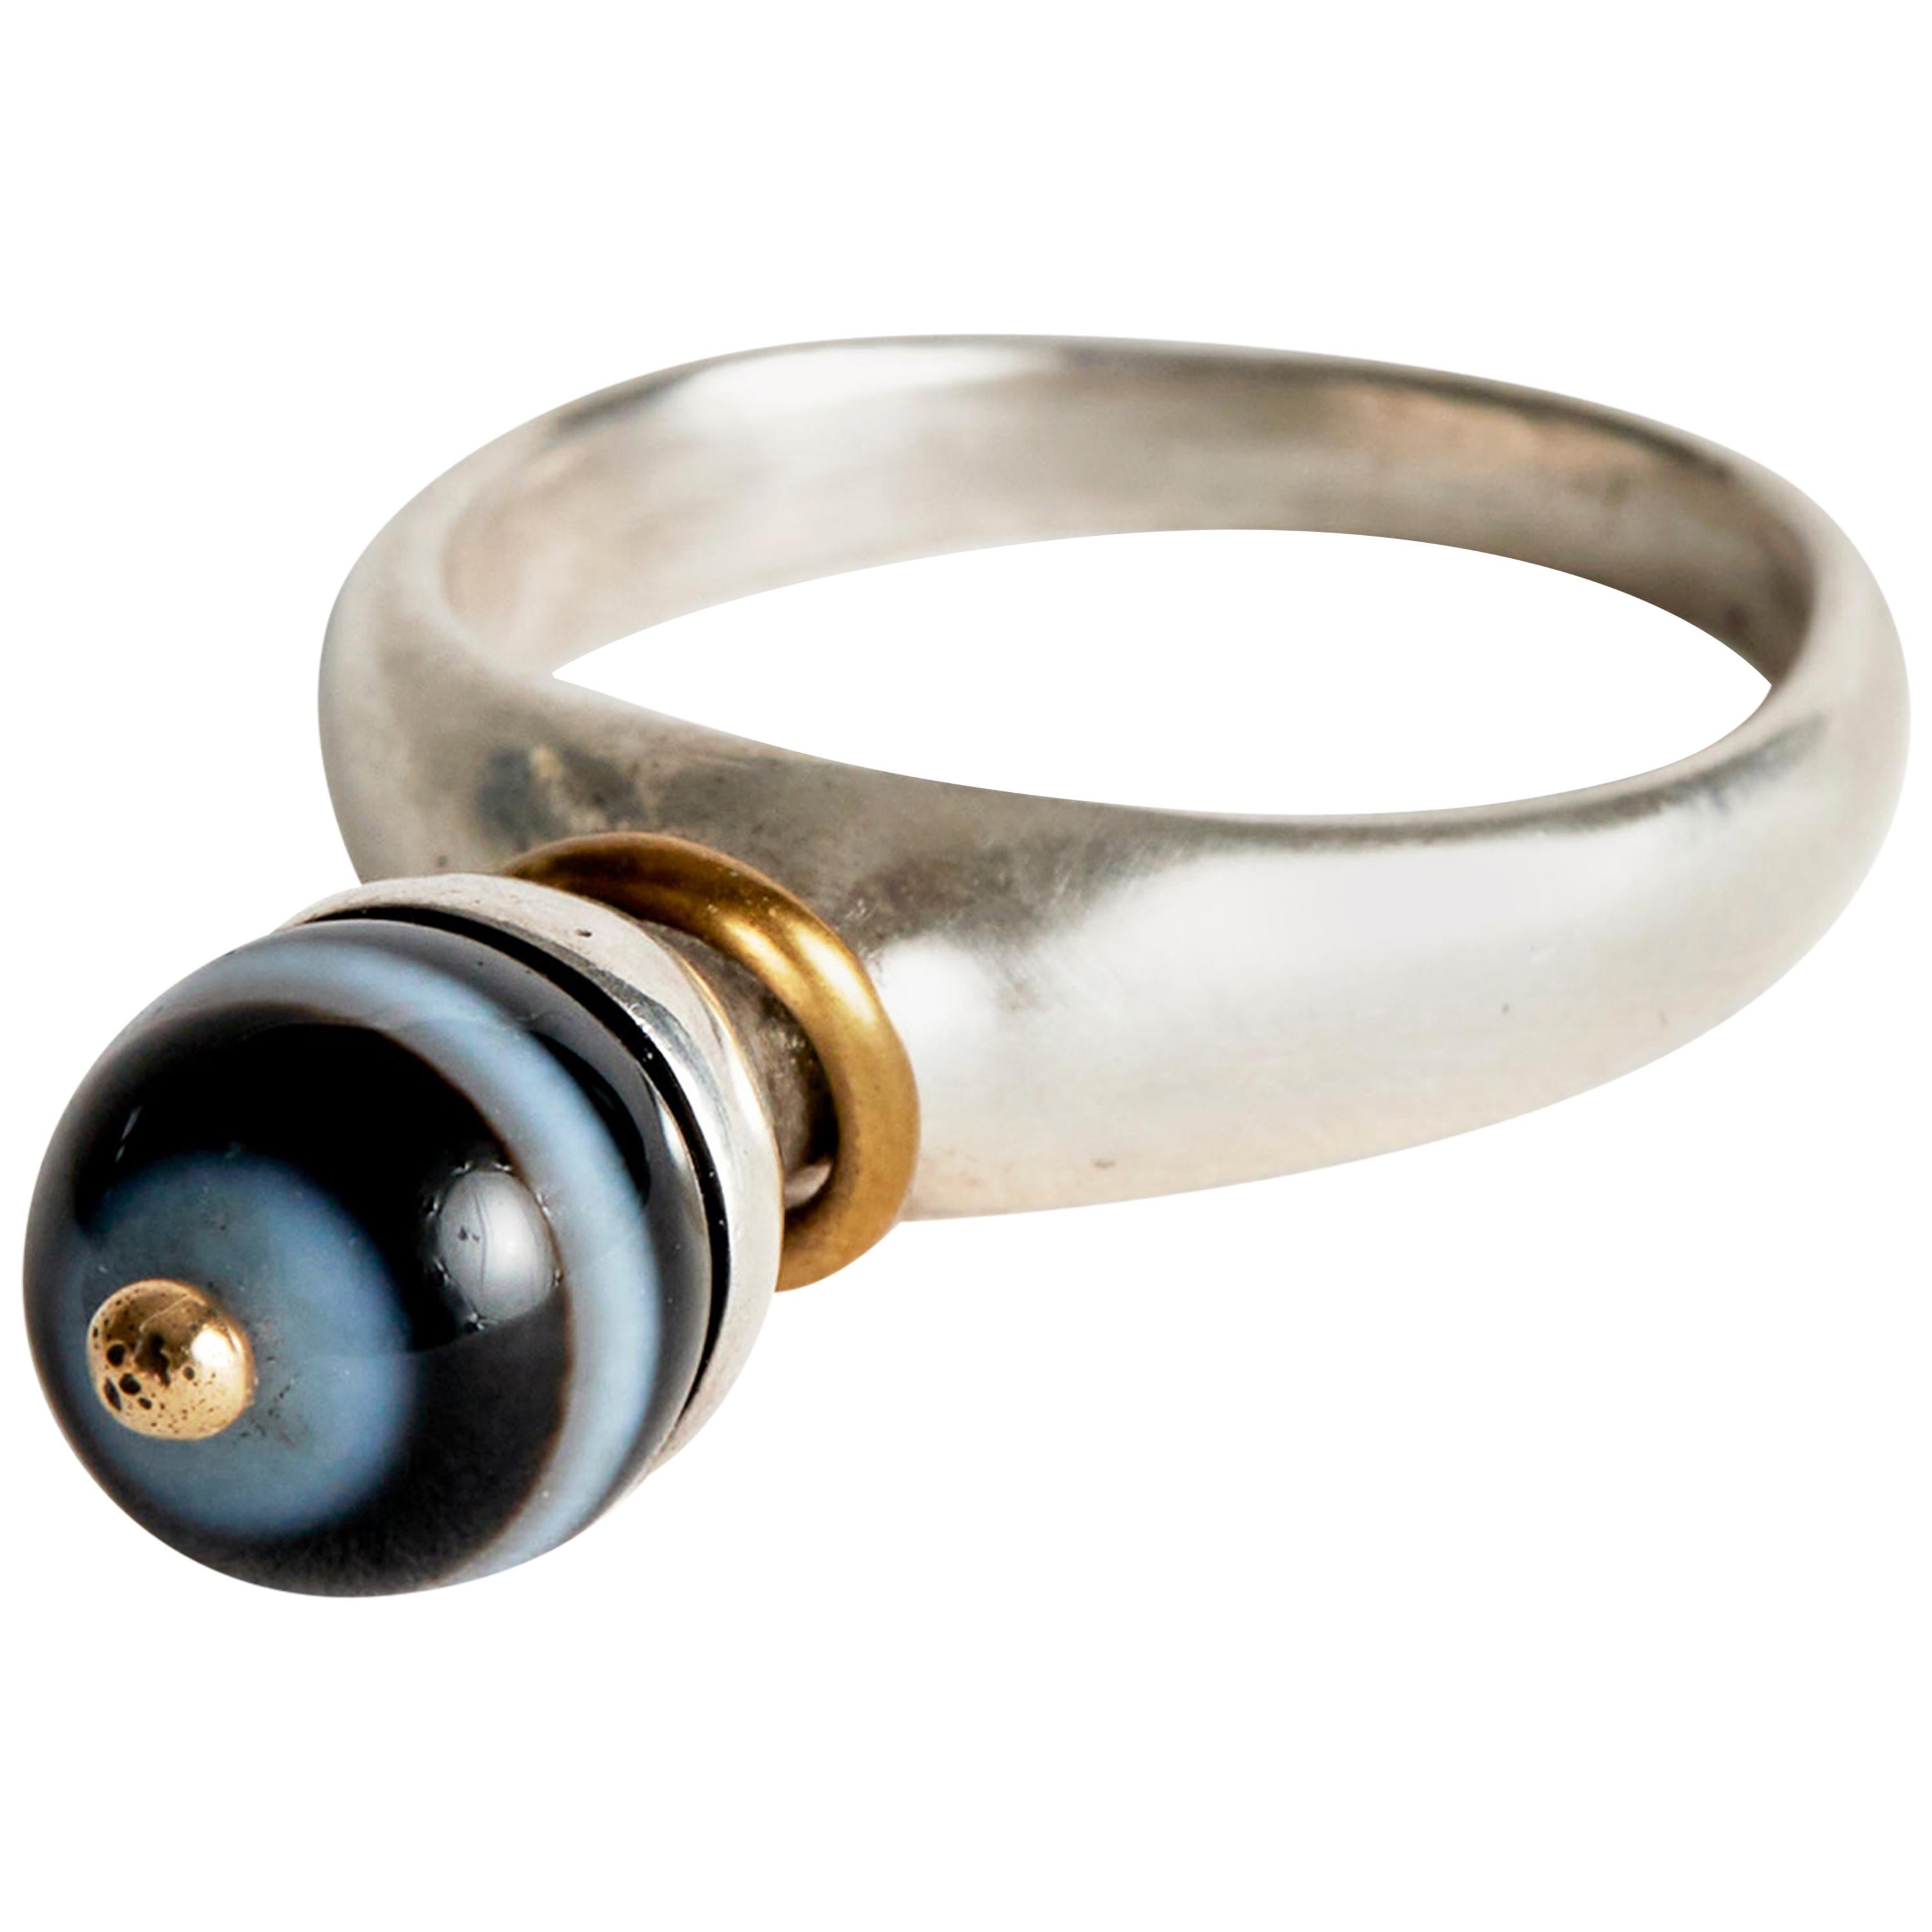 Audrey Werner, Sterling Silver and Agate Chalice Ring, United States, 2002